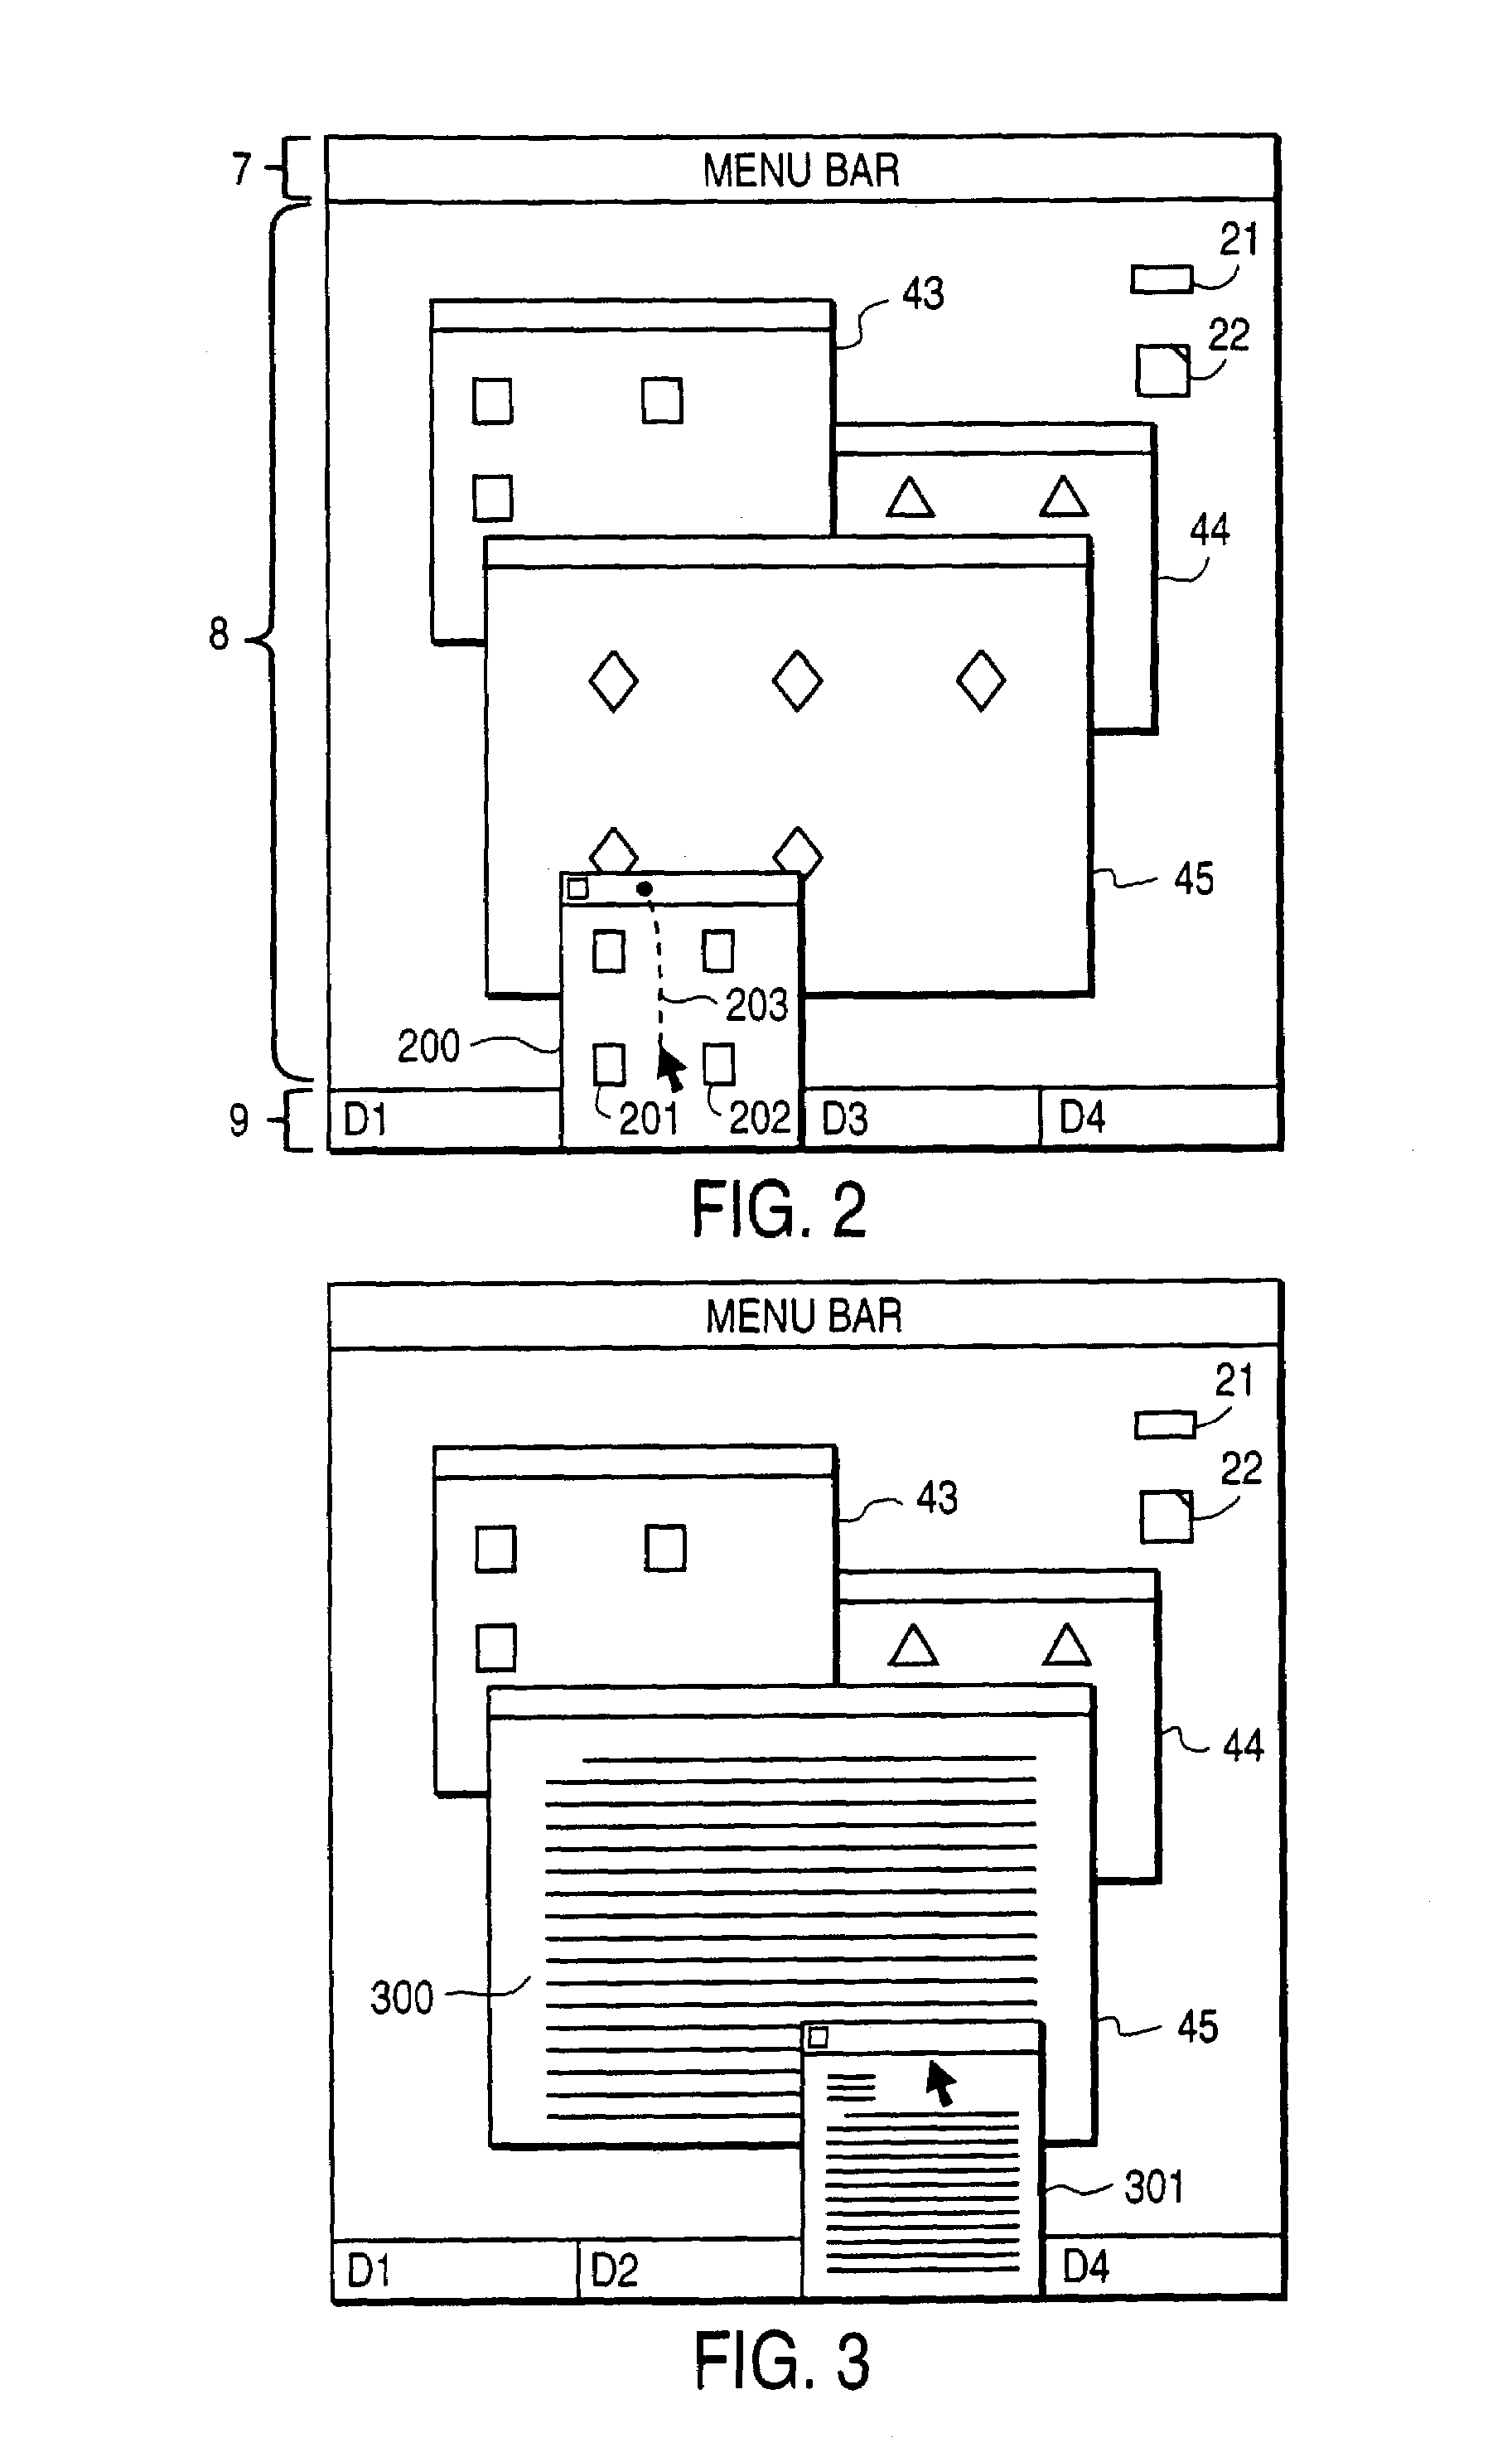 Computer system with graphical user interface including drawer-like windows